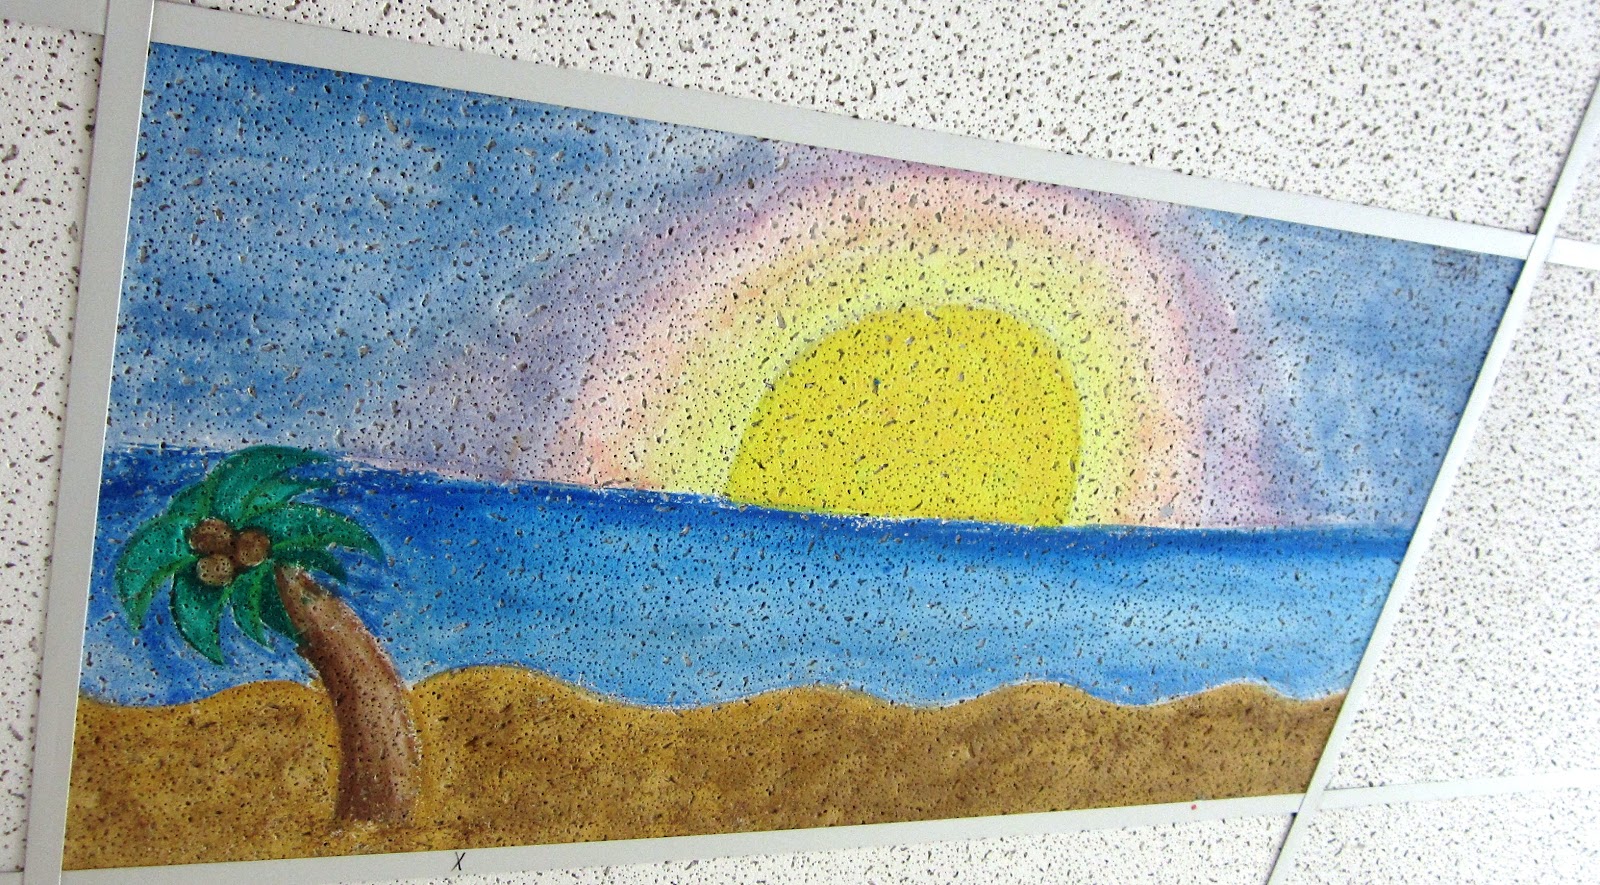 Ceiling Tile Art Customize Your Classroom I Want To Be A Super Teacher,Pima Cotton Percale Sheets